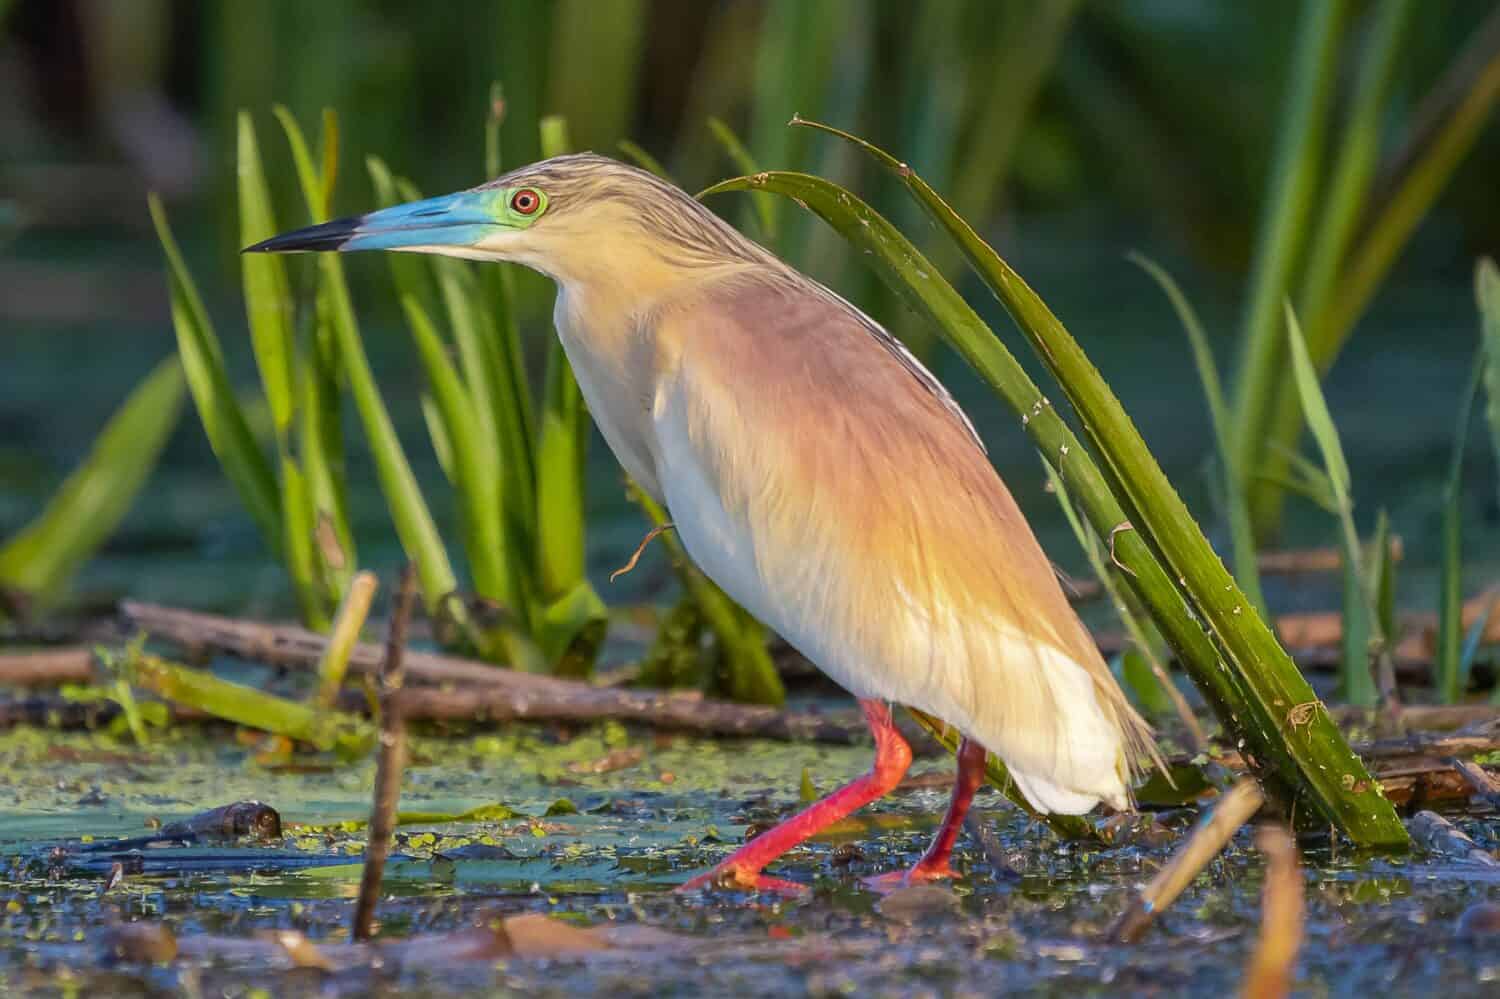 squacco heron - Ardeola ralloides - wading in marsh with green background. Photo from Danube Delta in Romania.